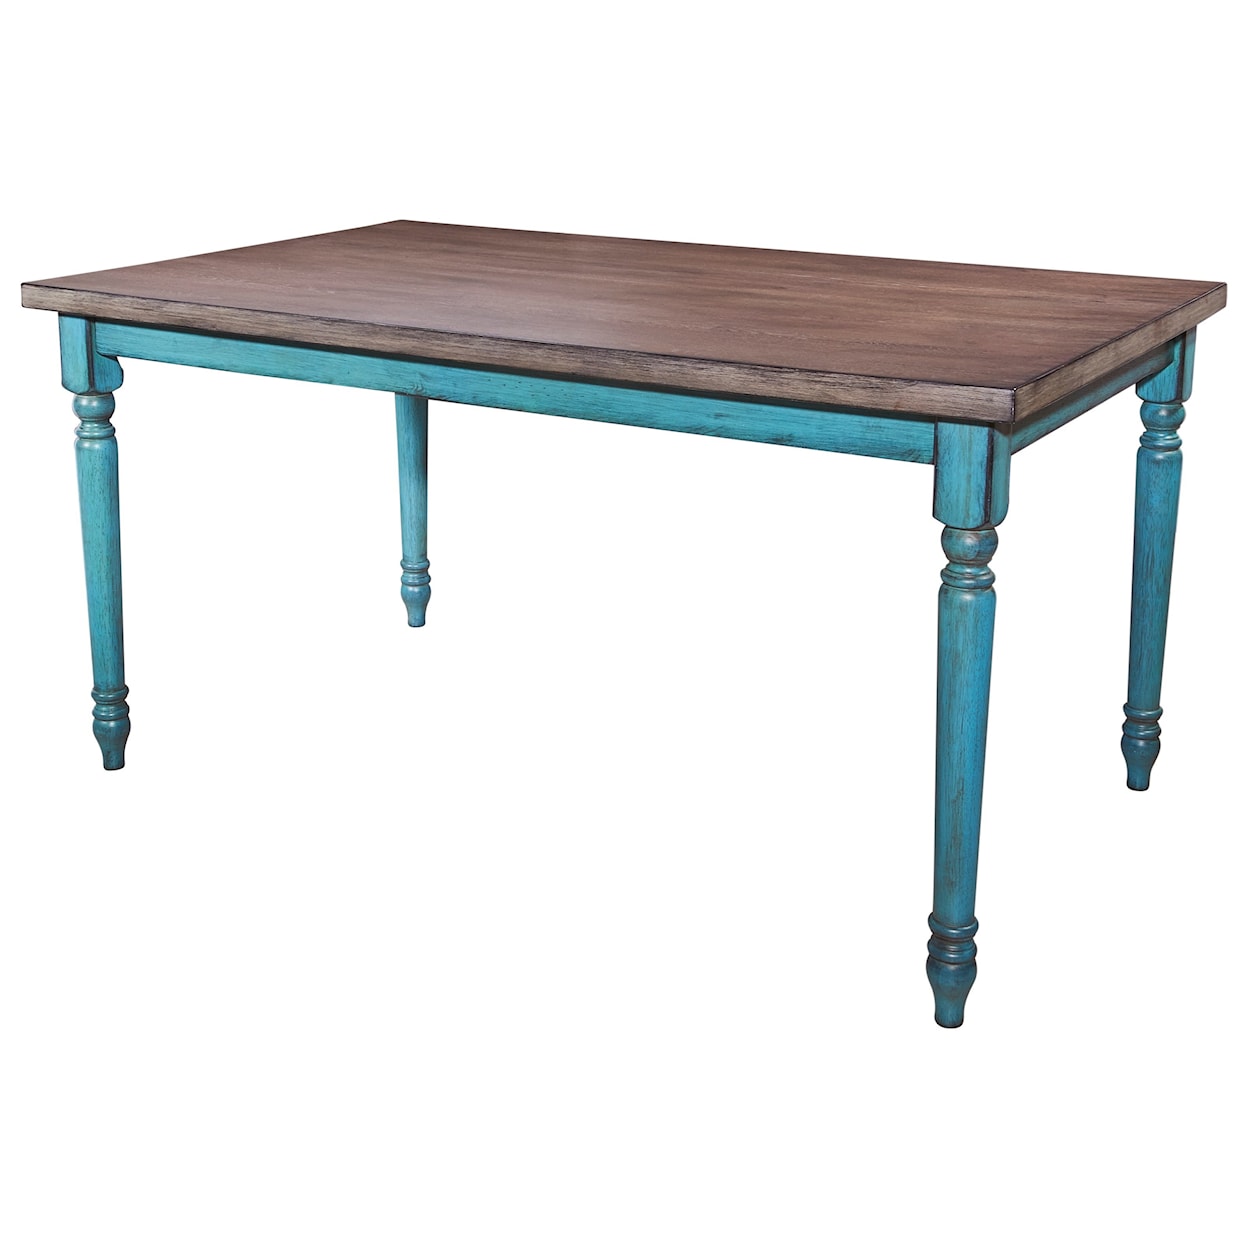 Powell Willow Willow Dining Table